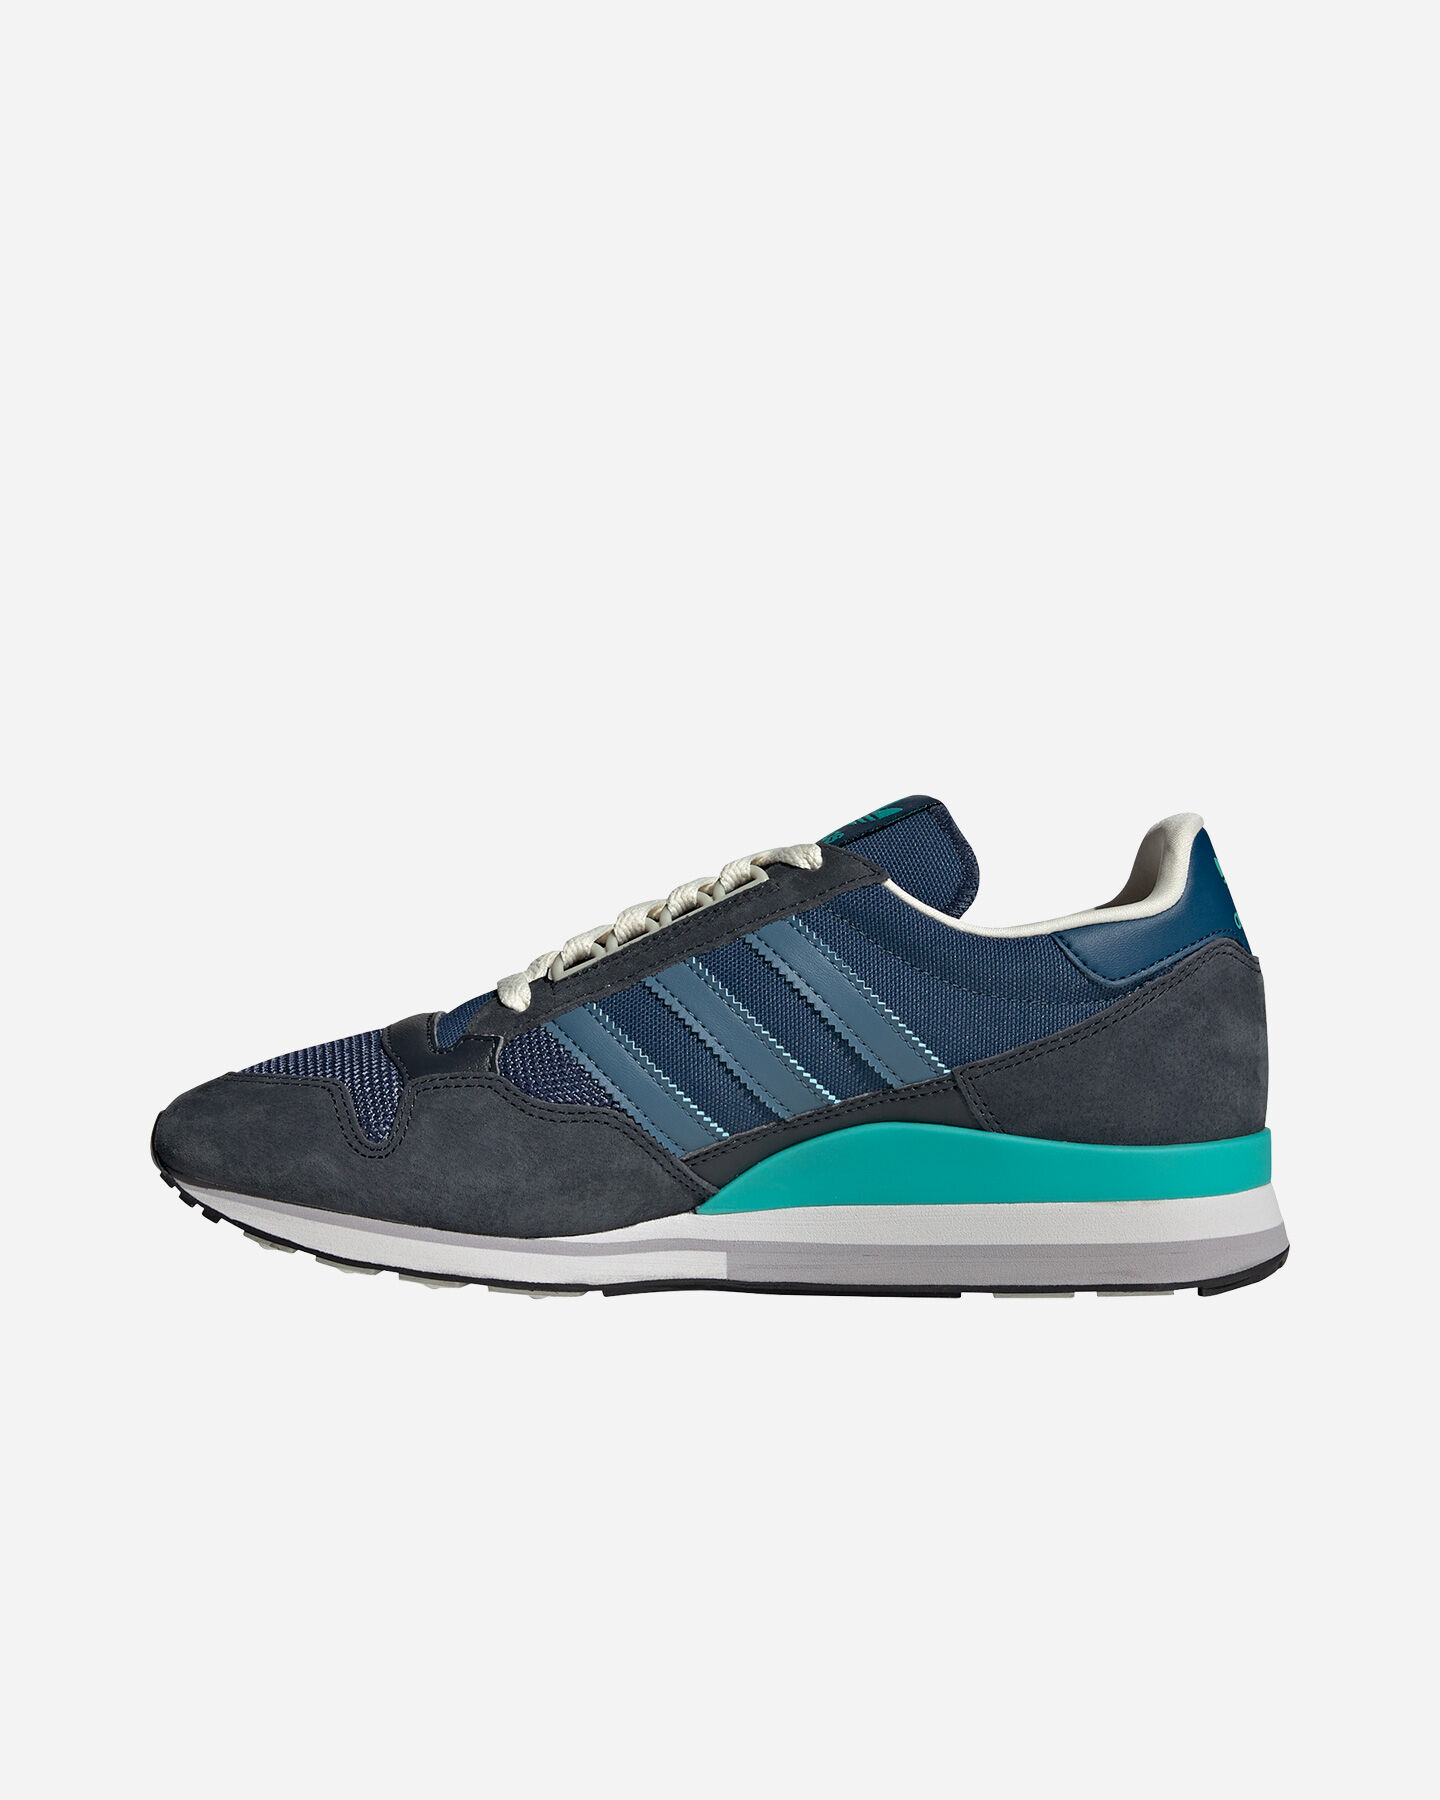  Scarpe sneakers ADIDAS ZX 500 M S5375961 scatto 3